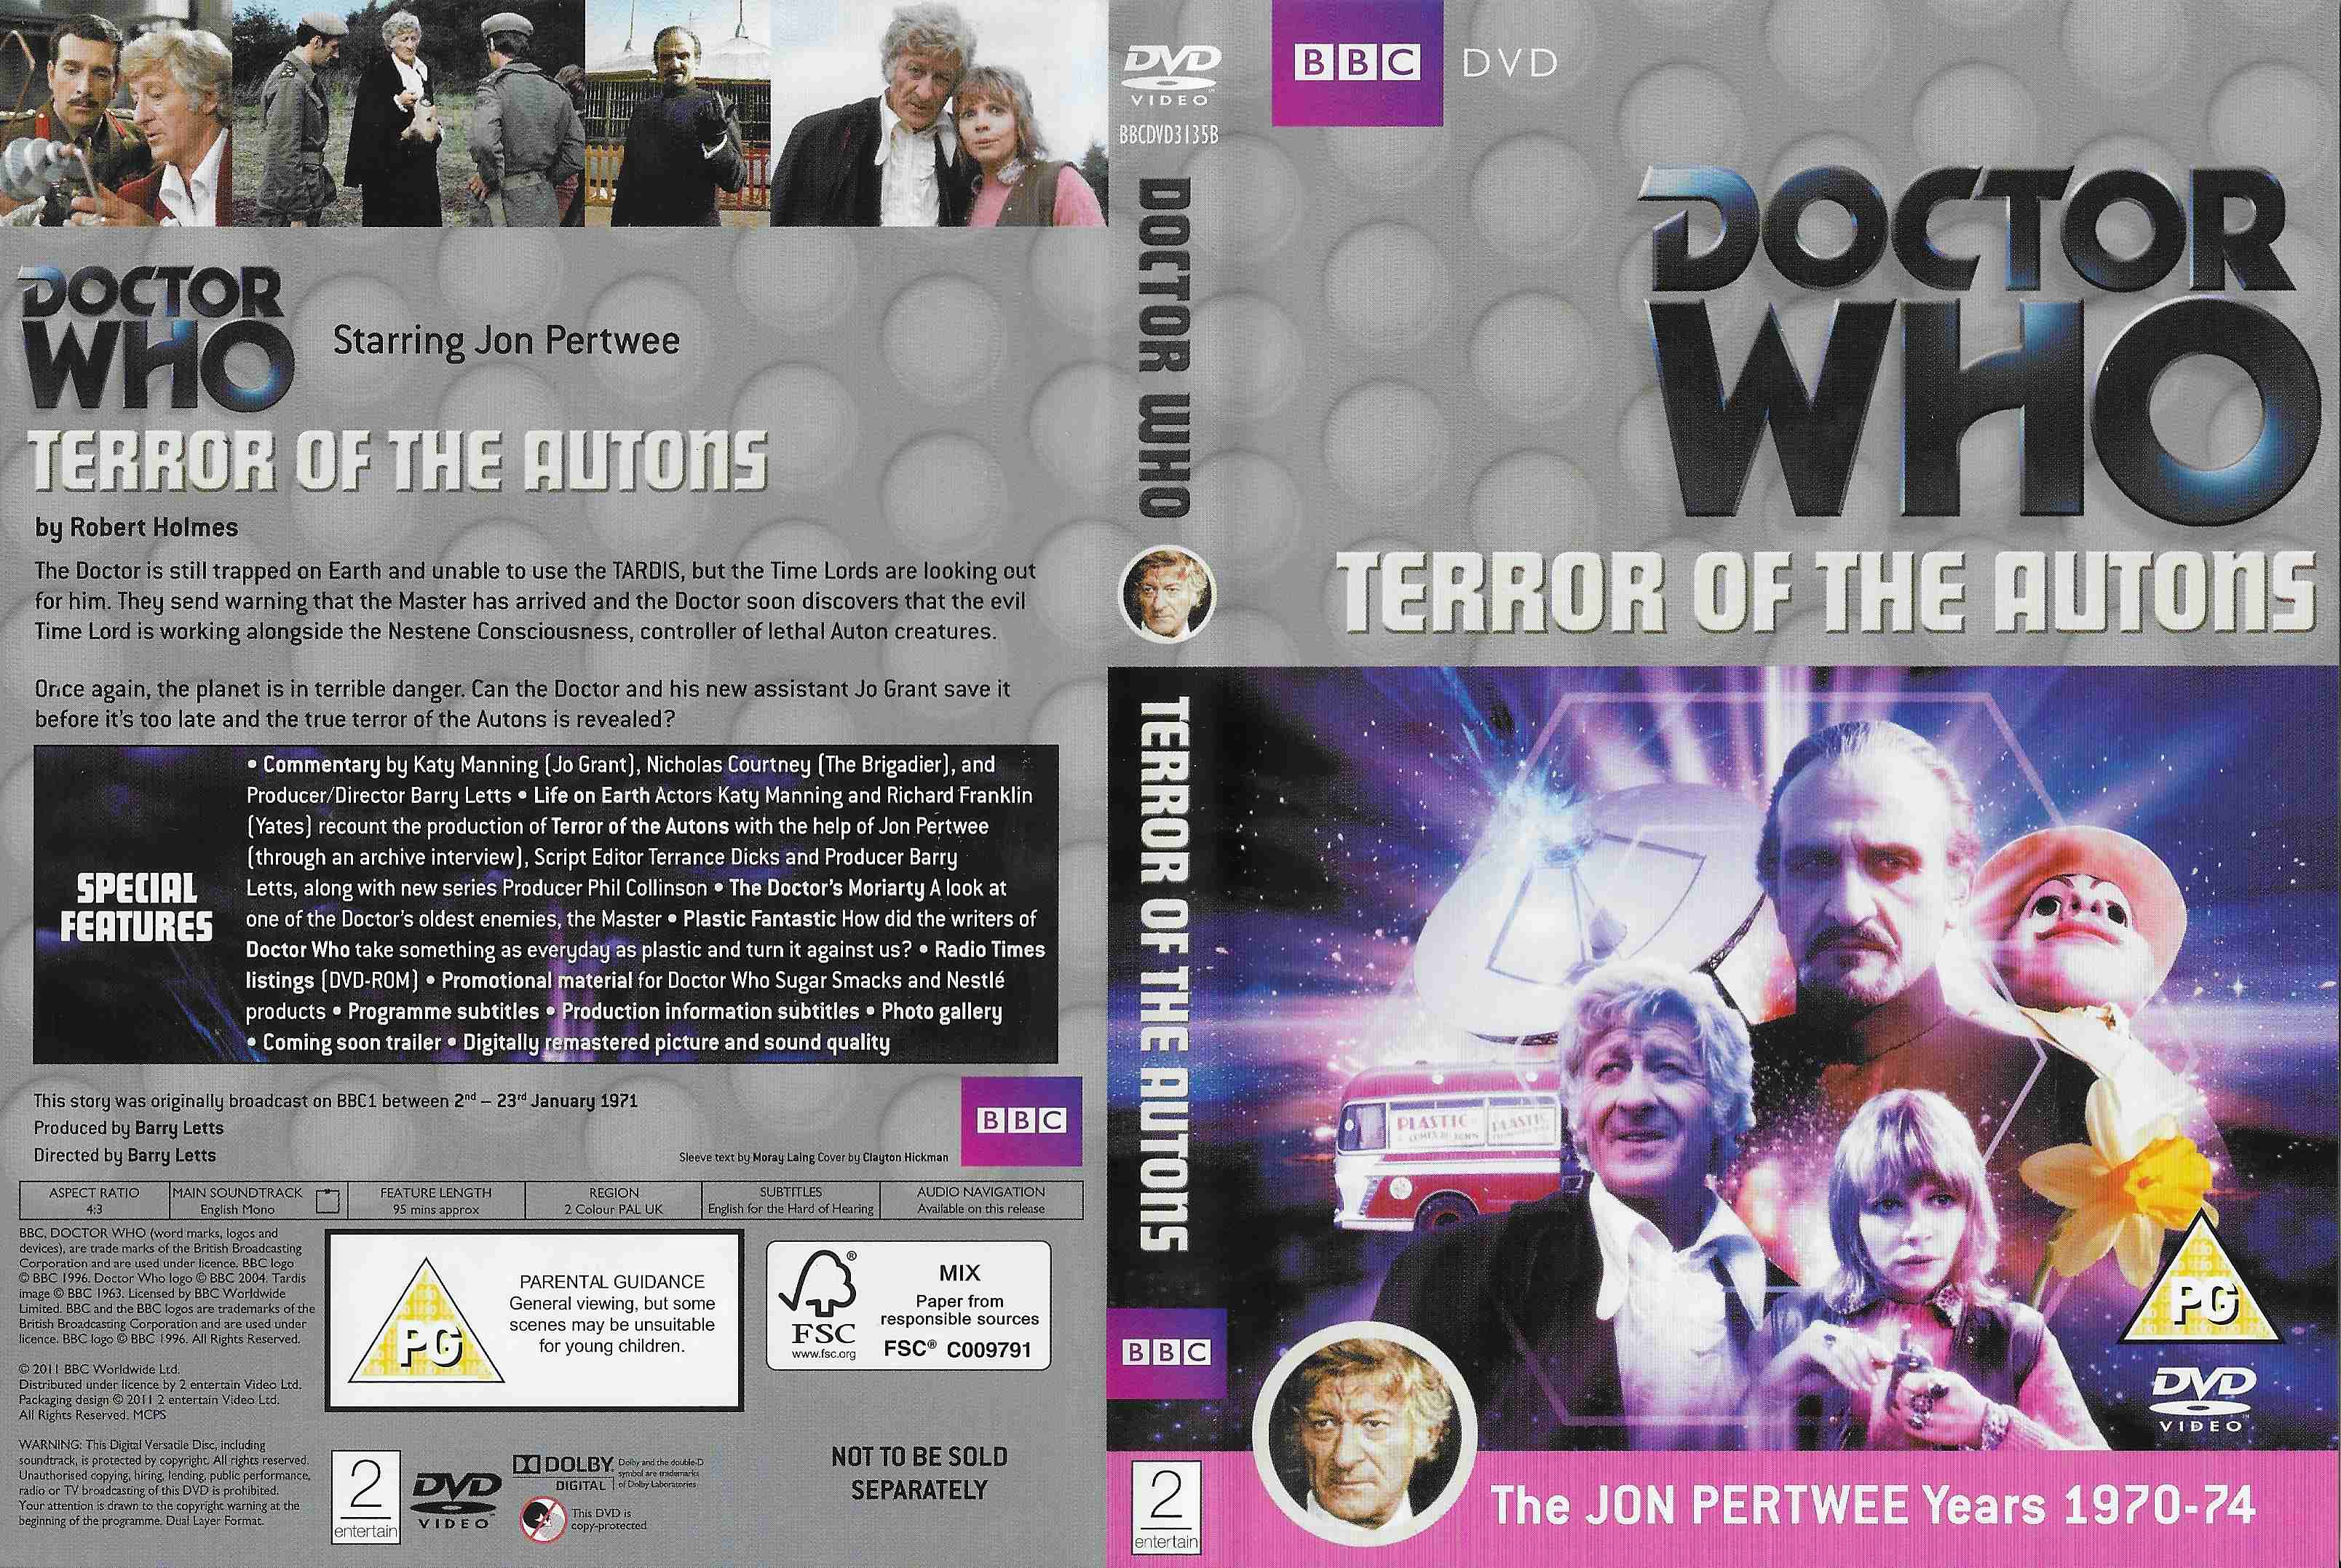 Picture of BBCDVD 3135B Doctor Who - Terror of the Autons by artist Robert Holmes from the BBC records and Tapes library